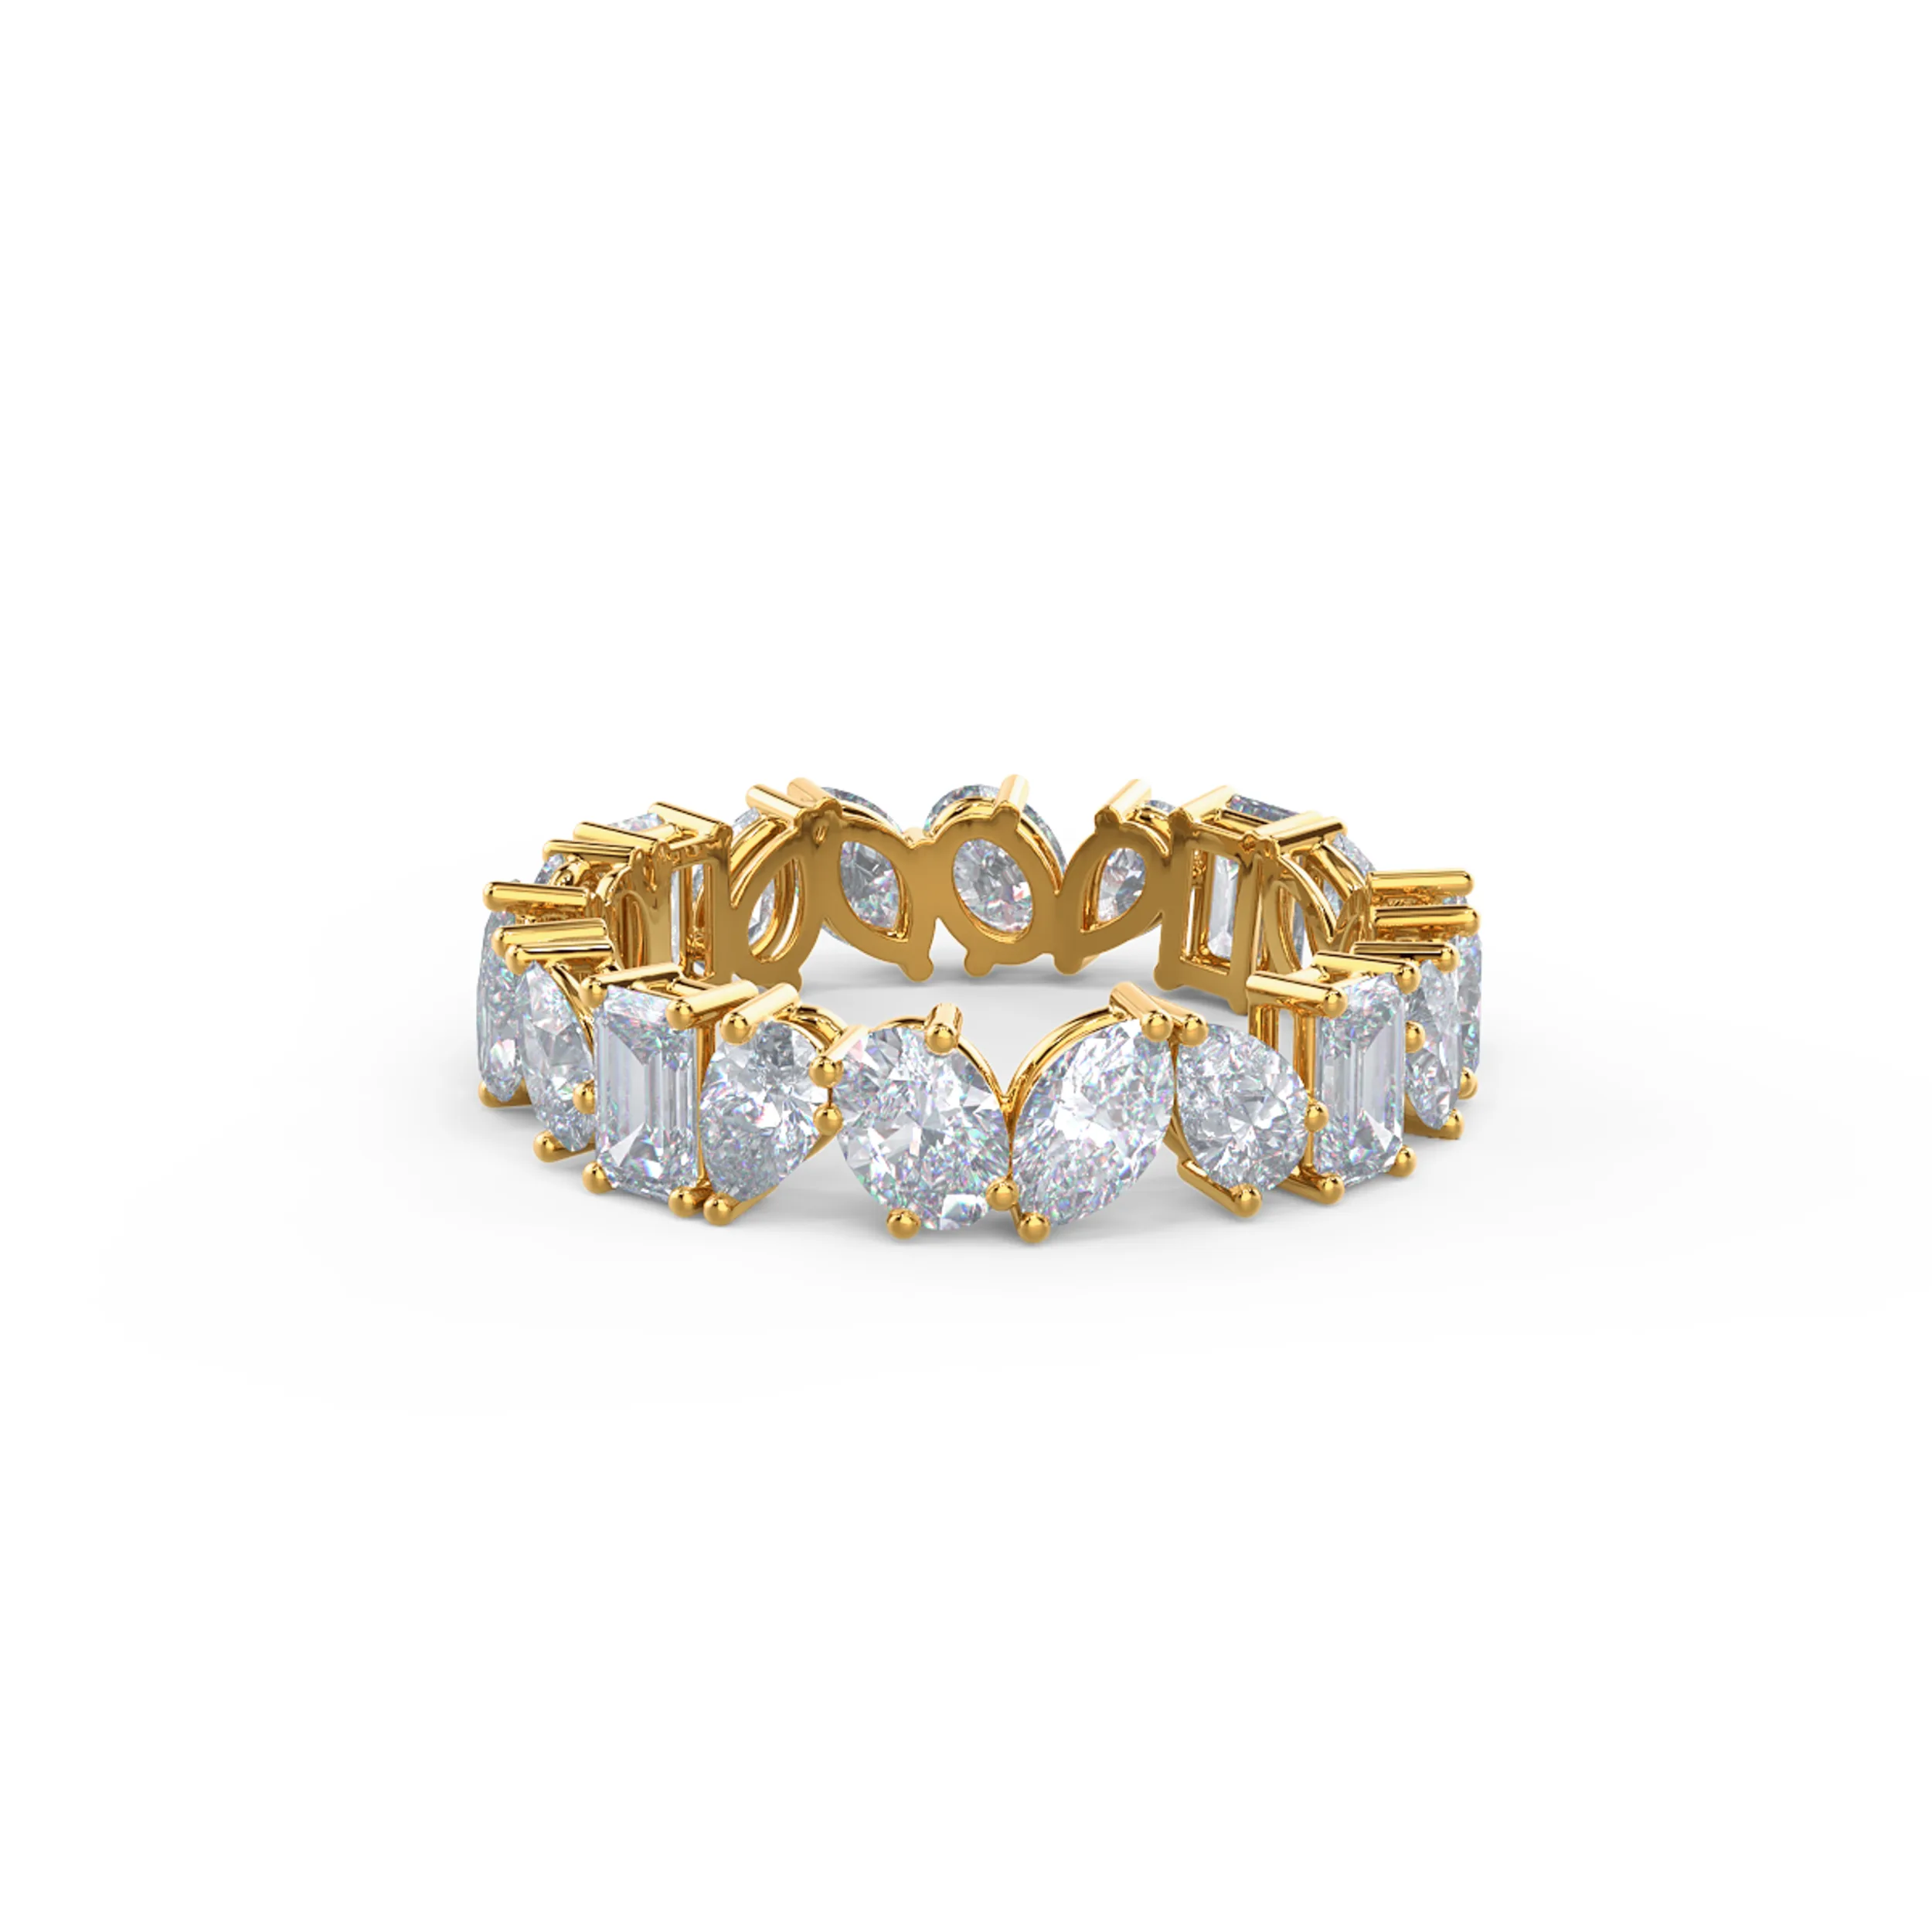 Exceptional Quality 2.5 Carat Lab Diamonds set in Yellow Gold Cassidy Eternity Band (Main View)